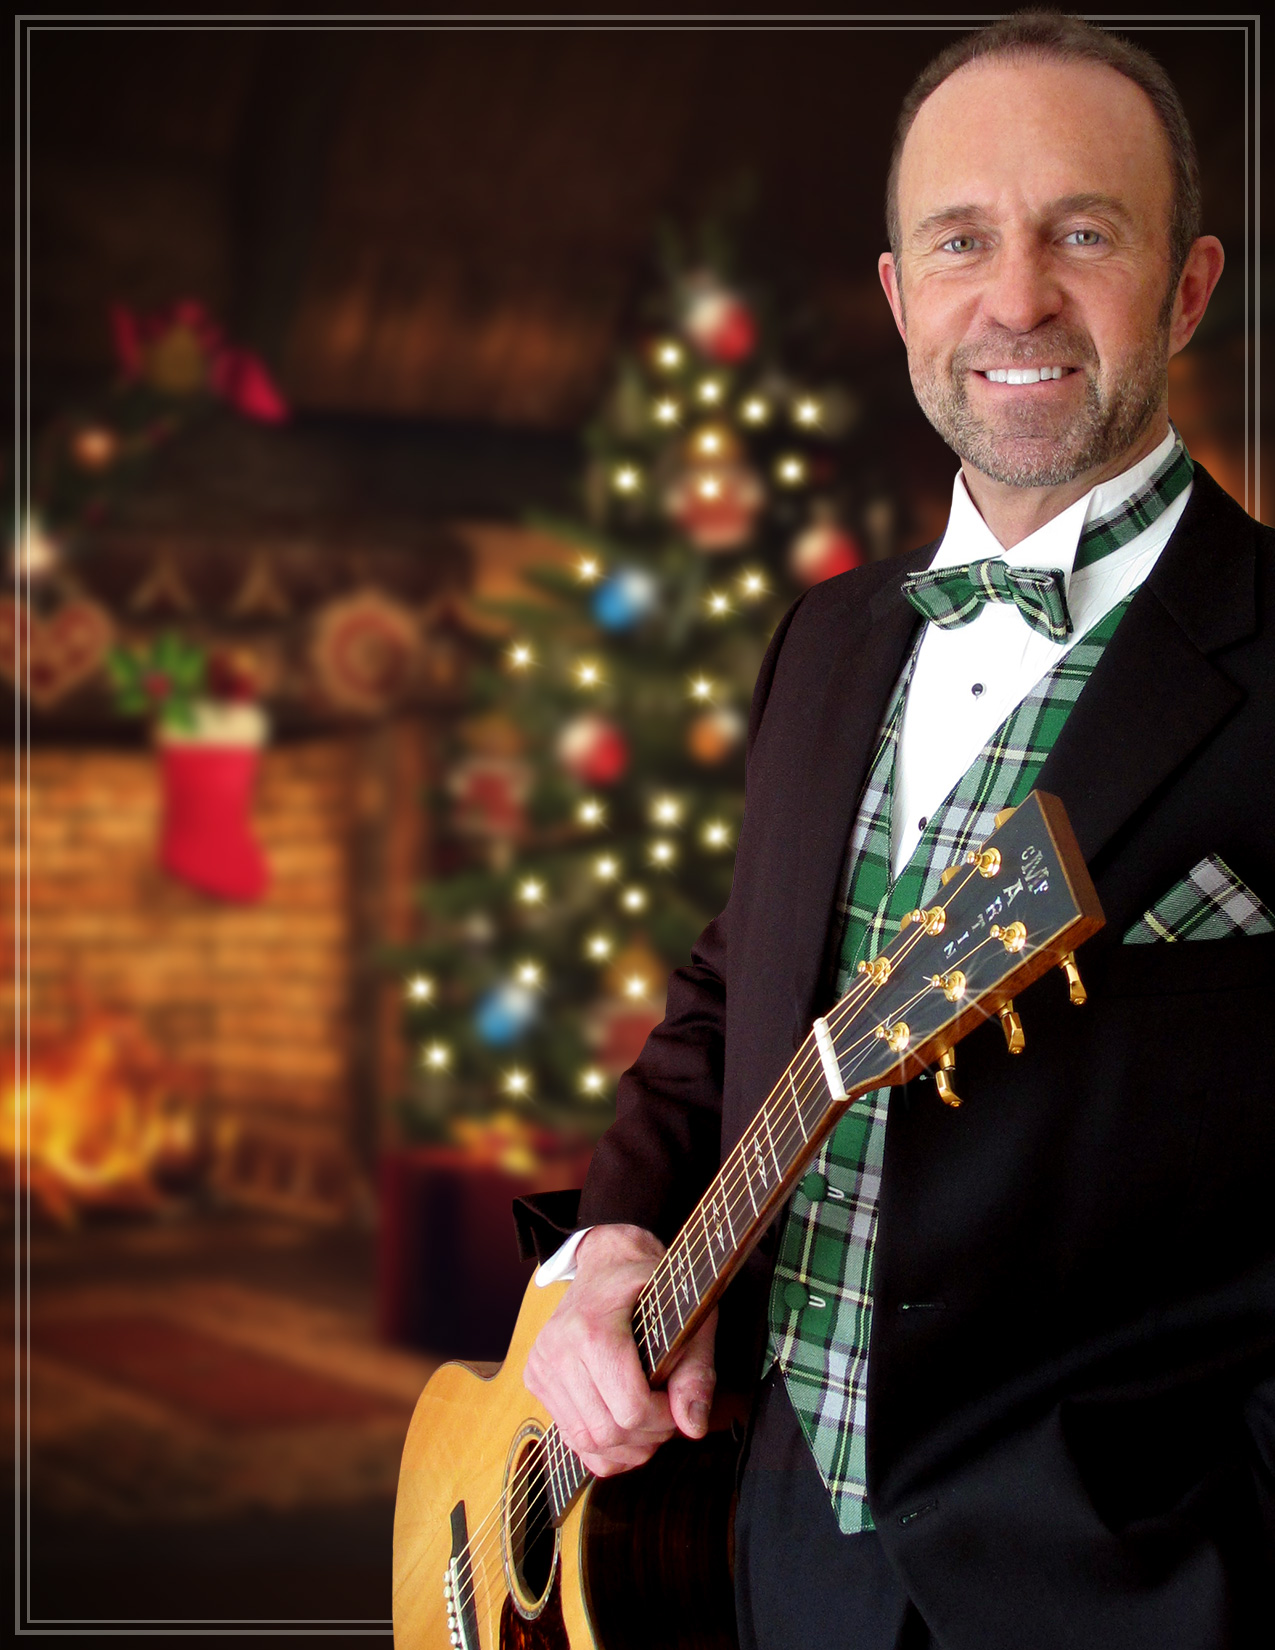 Image of musician holding guitar with lit Christmas tree in background.